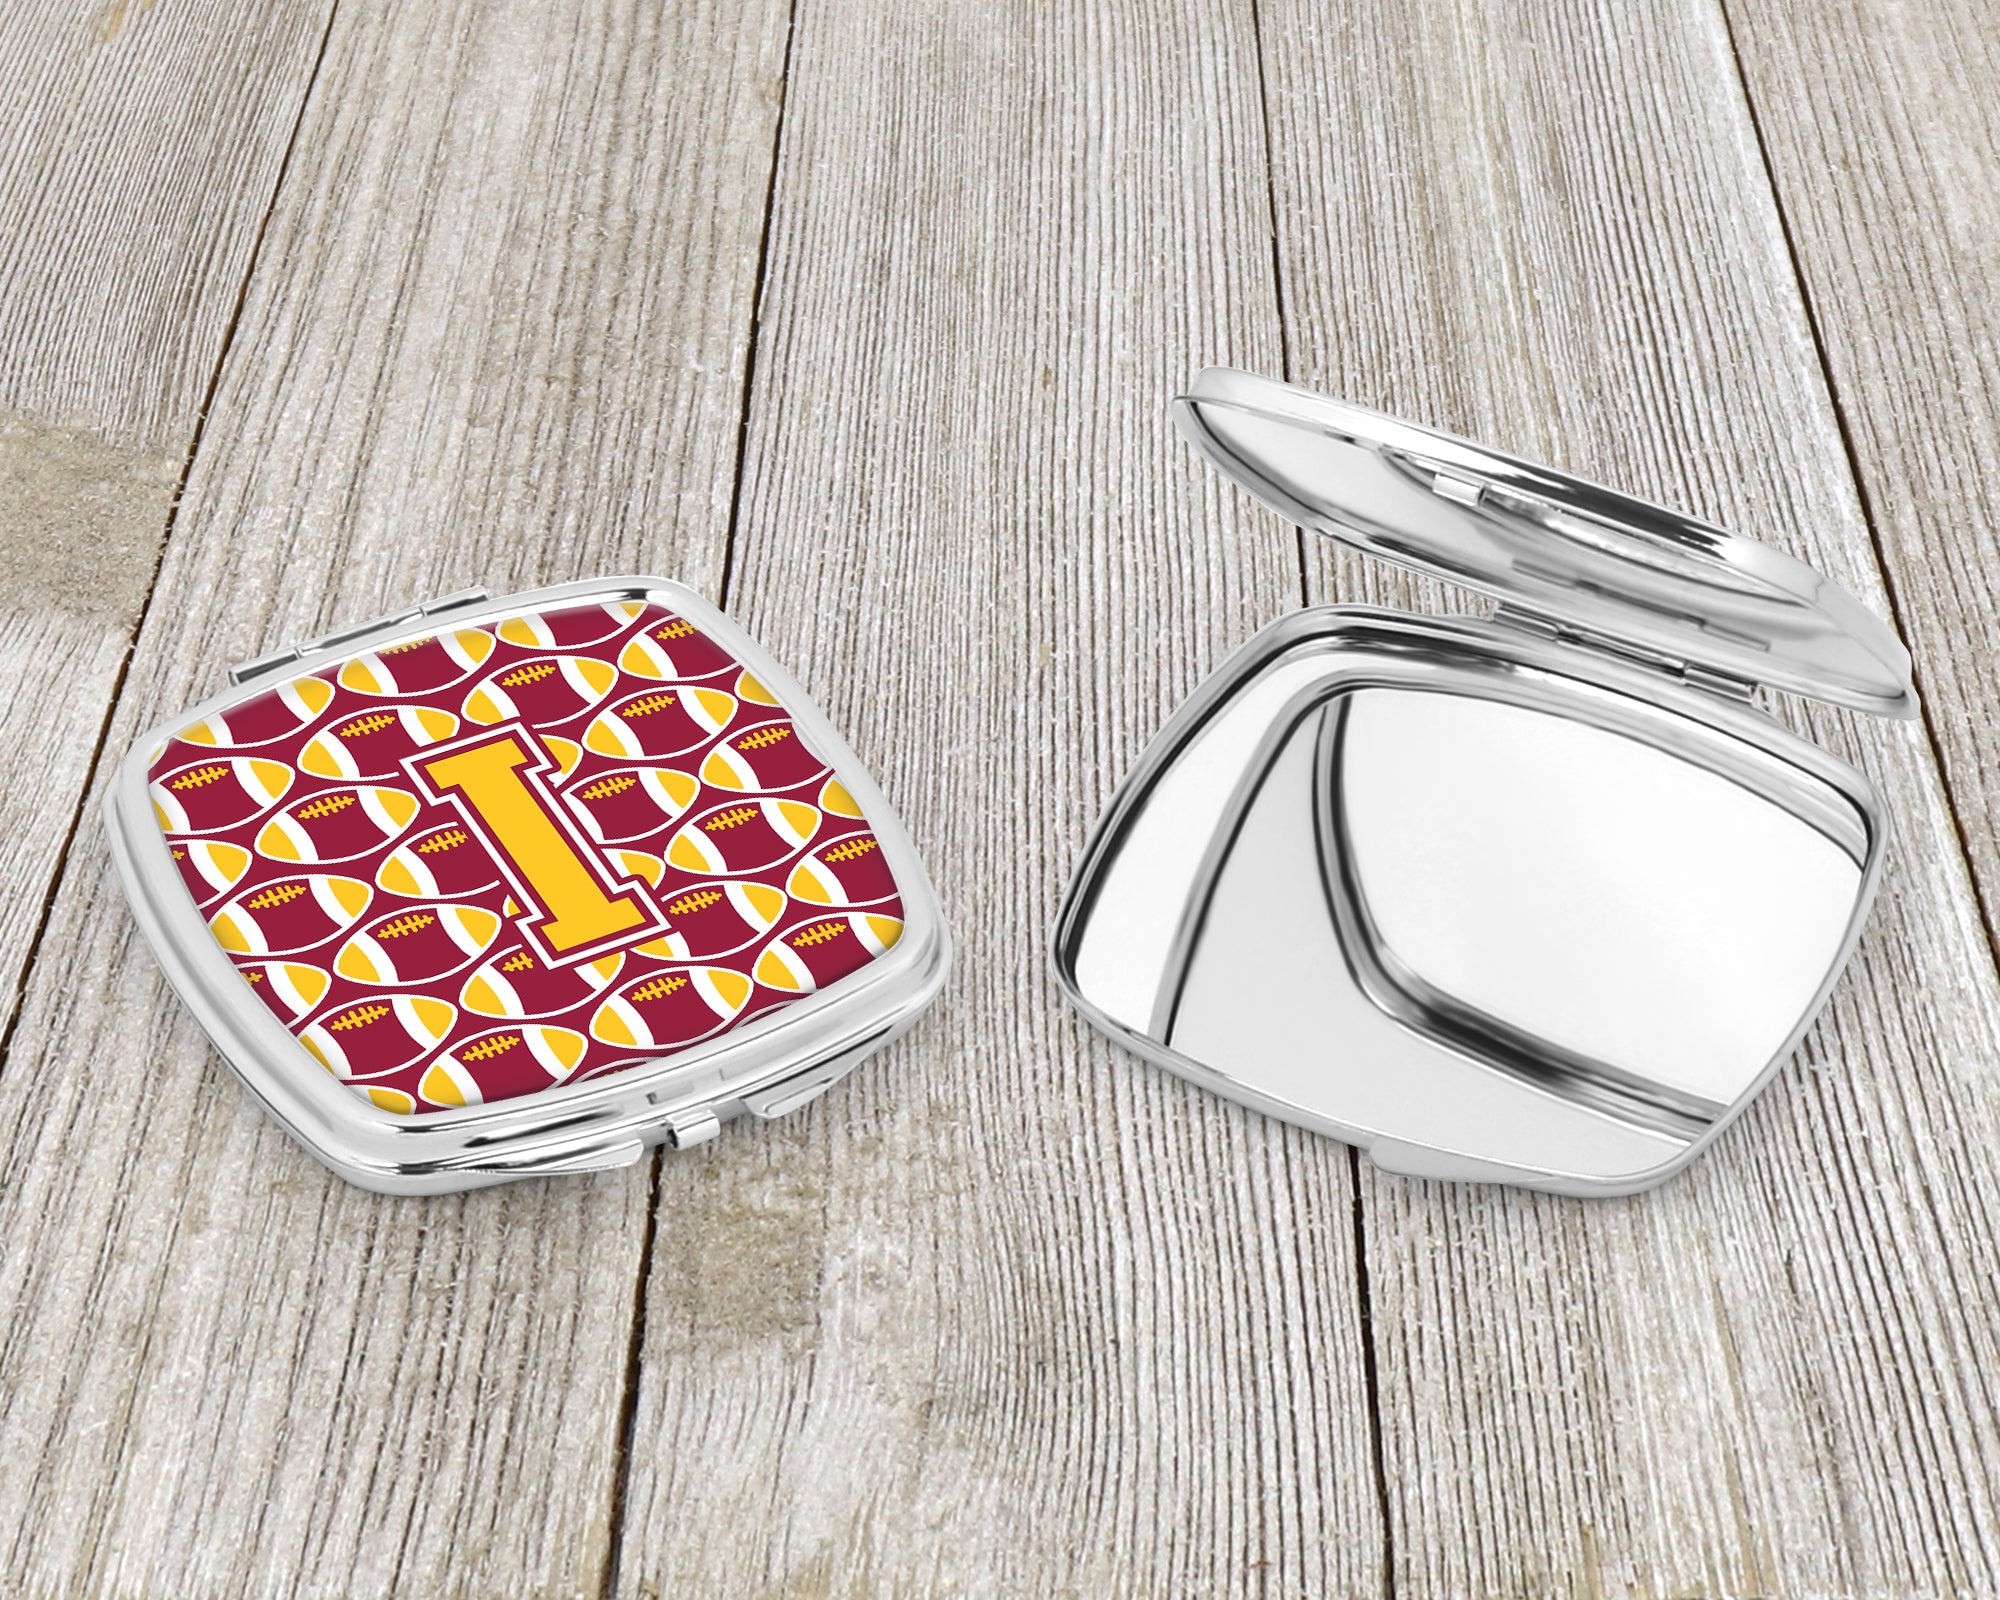 Letter I Football Maroon and Gold Compact Mirror CJ1081-ISCM  the-store.com.